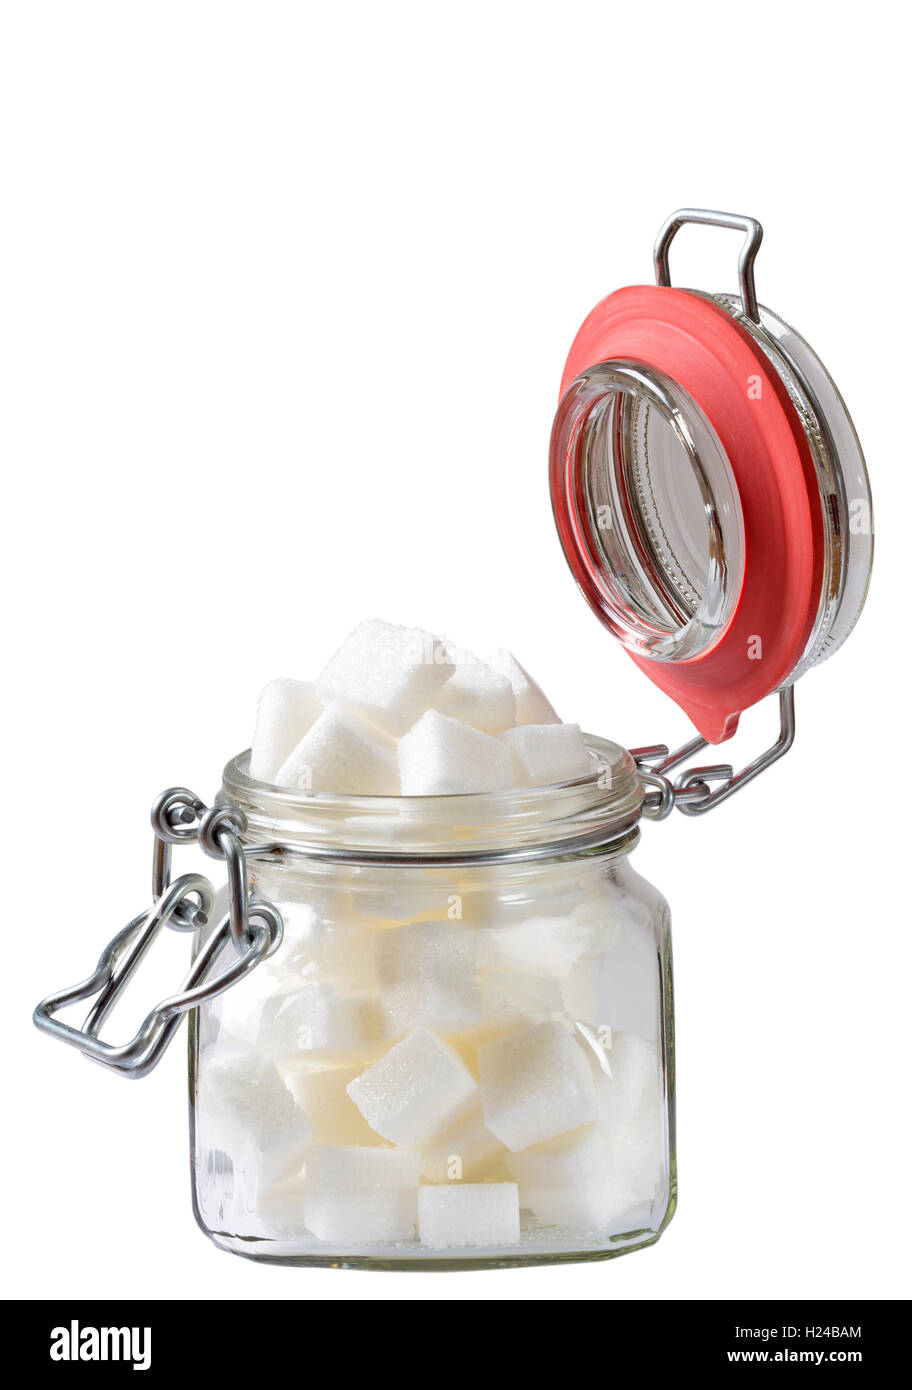 Glass jar filled with sugar cubes with the open cap isolated over the white background. Clipping path included. The image is in Stock Photo